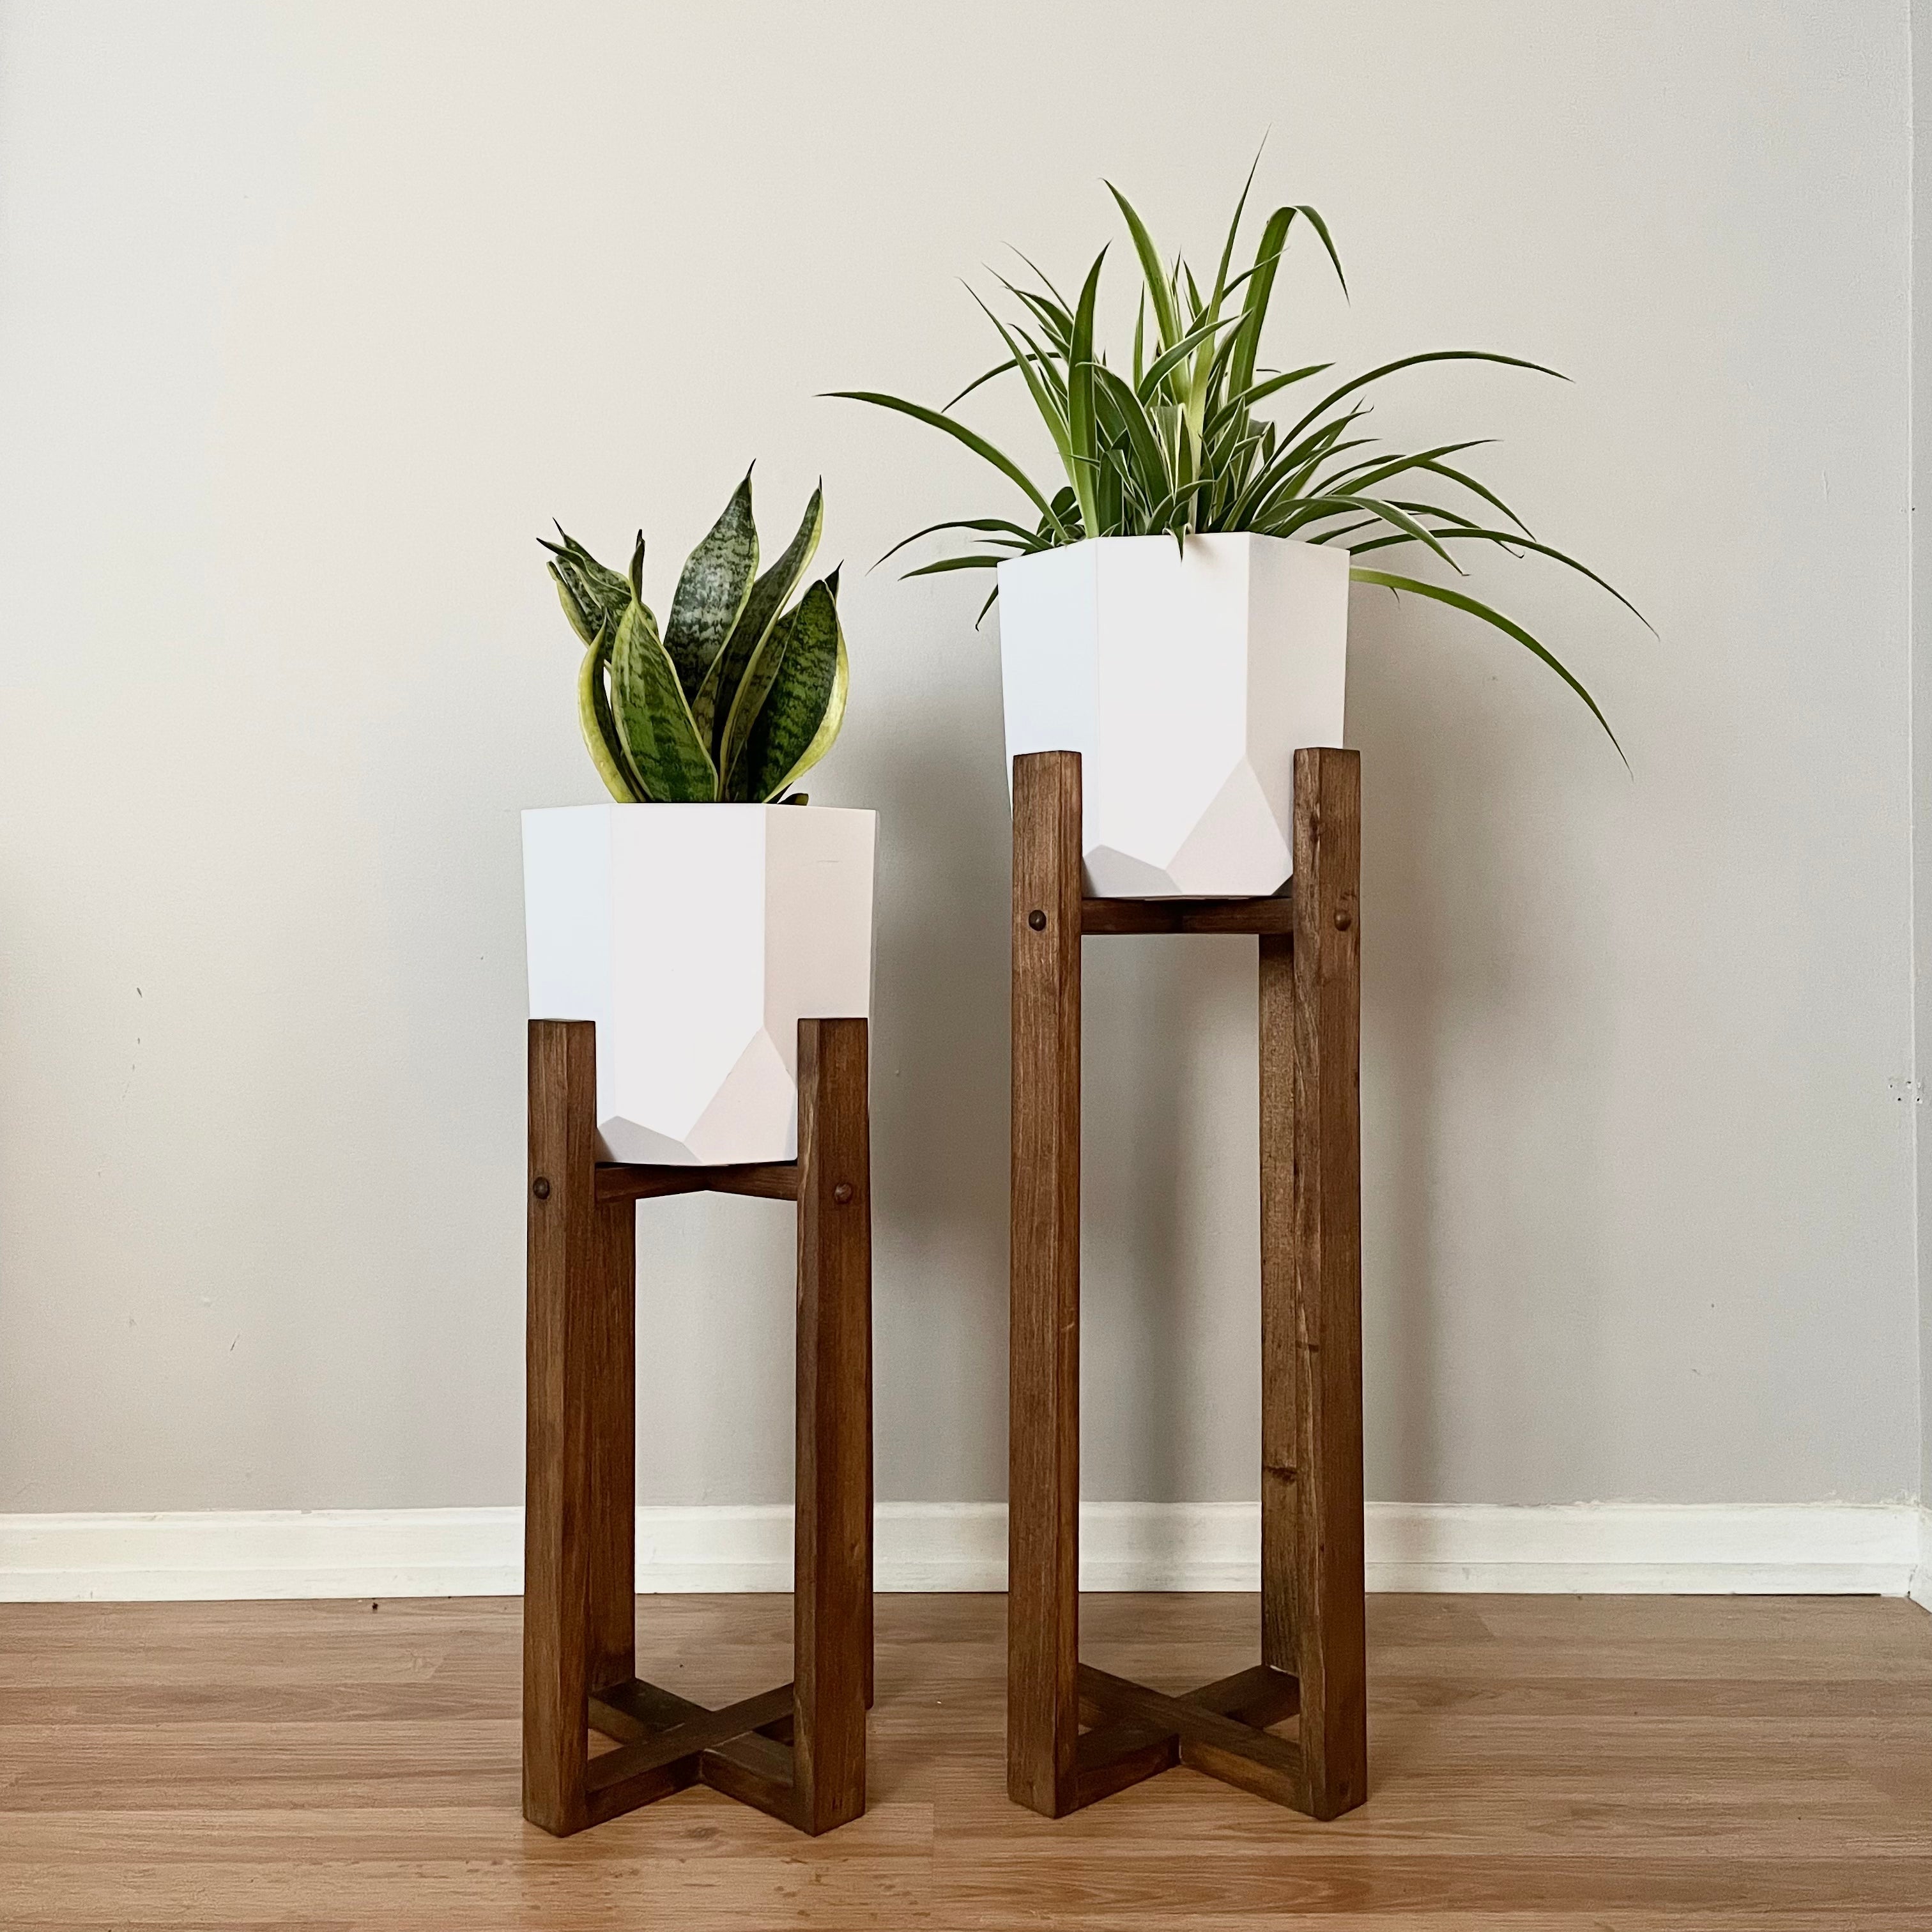 MIX & MATCH: Rustic Stain Plant Stands Project Pine Designs MED + Large Plant Stands + 2 Plant Pots 